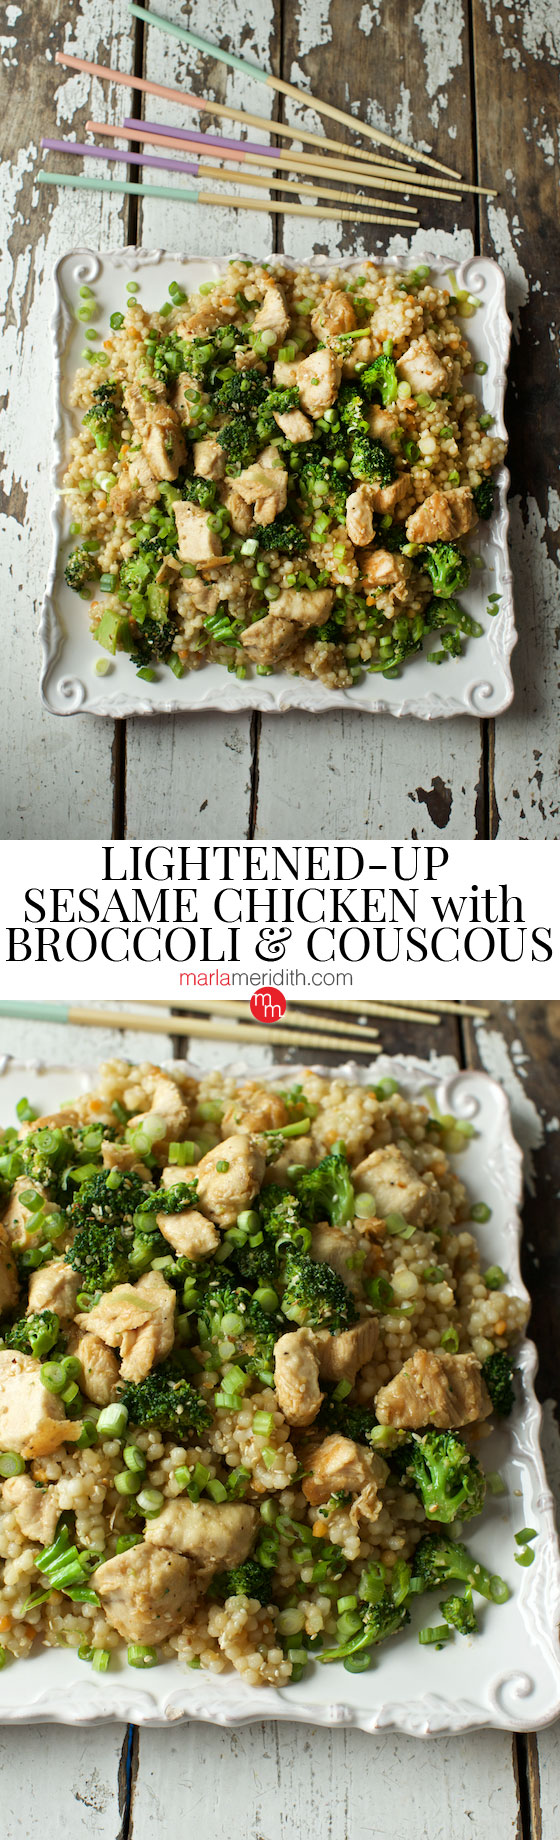 Lightened-Up Sesame Chicken with Broccoli & Couscous recipe. A GREAT weeknight meal for the family! MarlaMeriditih.com ( @marlameridith )